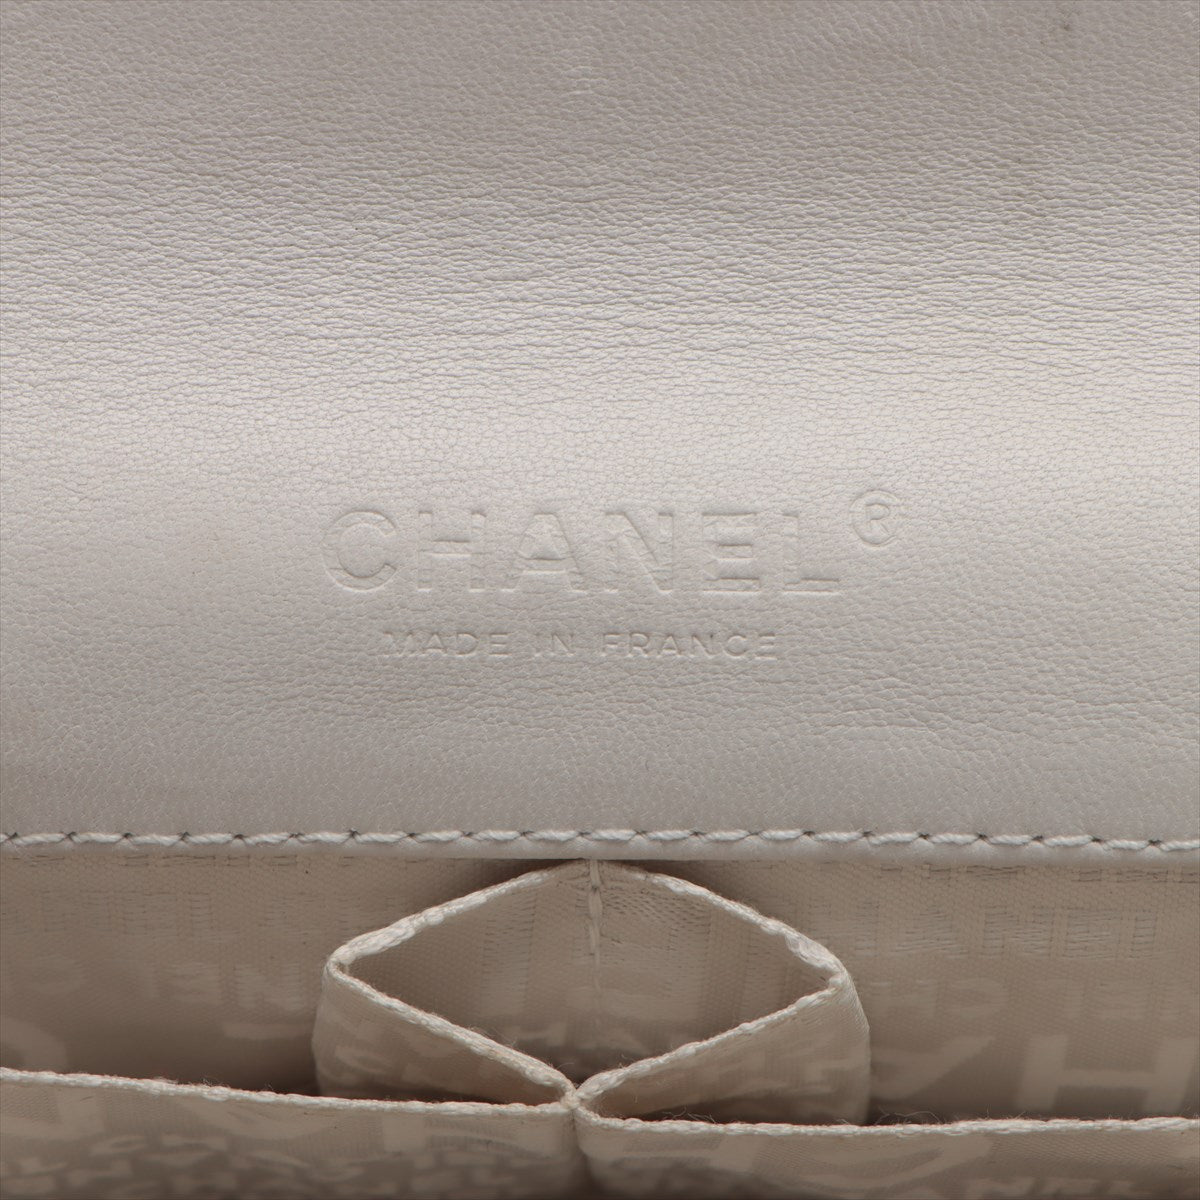 Chanel Chocolate Bar in Chain Shoulder Bag White Silver G  8th